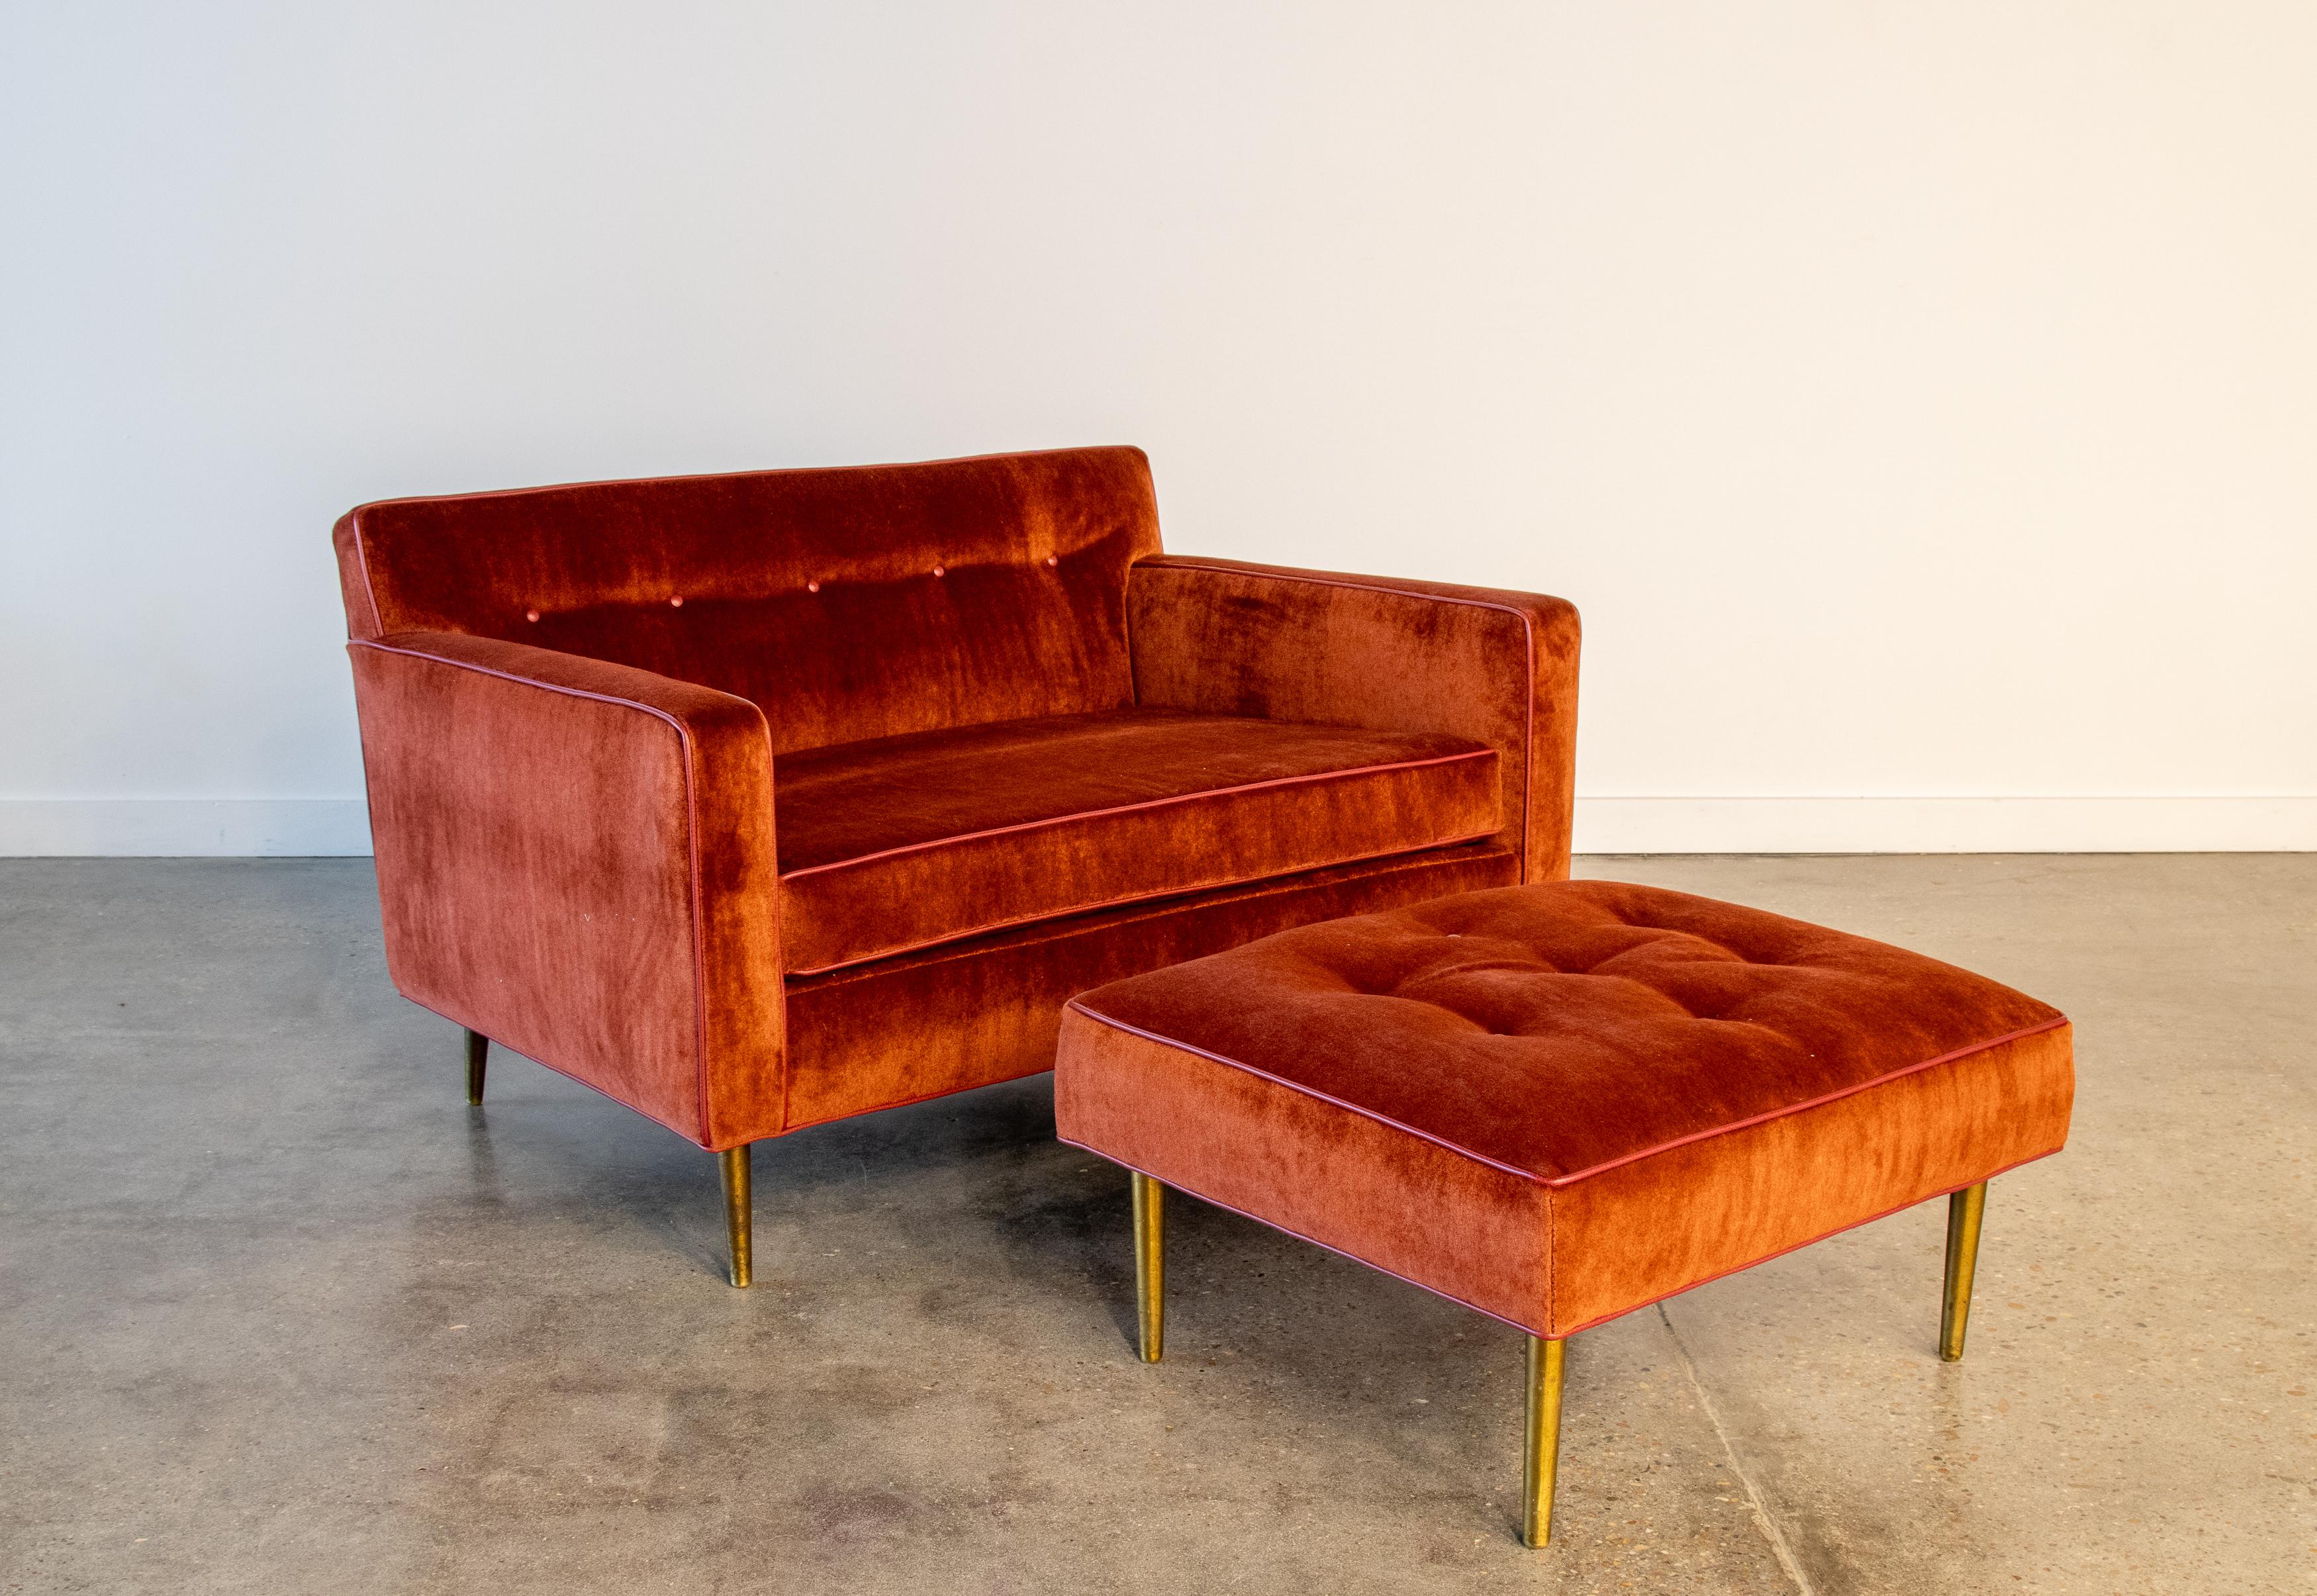 An extra wide cuddle sofa chair designed by Edward Wormley for Dunbar. Featuring brass legs and new foam and red mohair.  The red mohair is accentuated with maroon leather piping and buttons. The no sag straps and six way hand tied coil spring